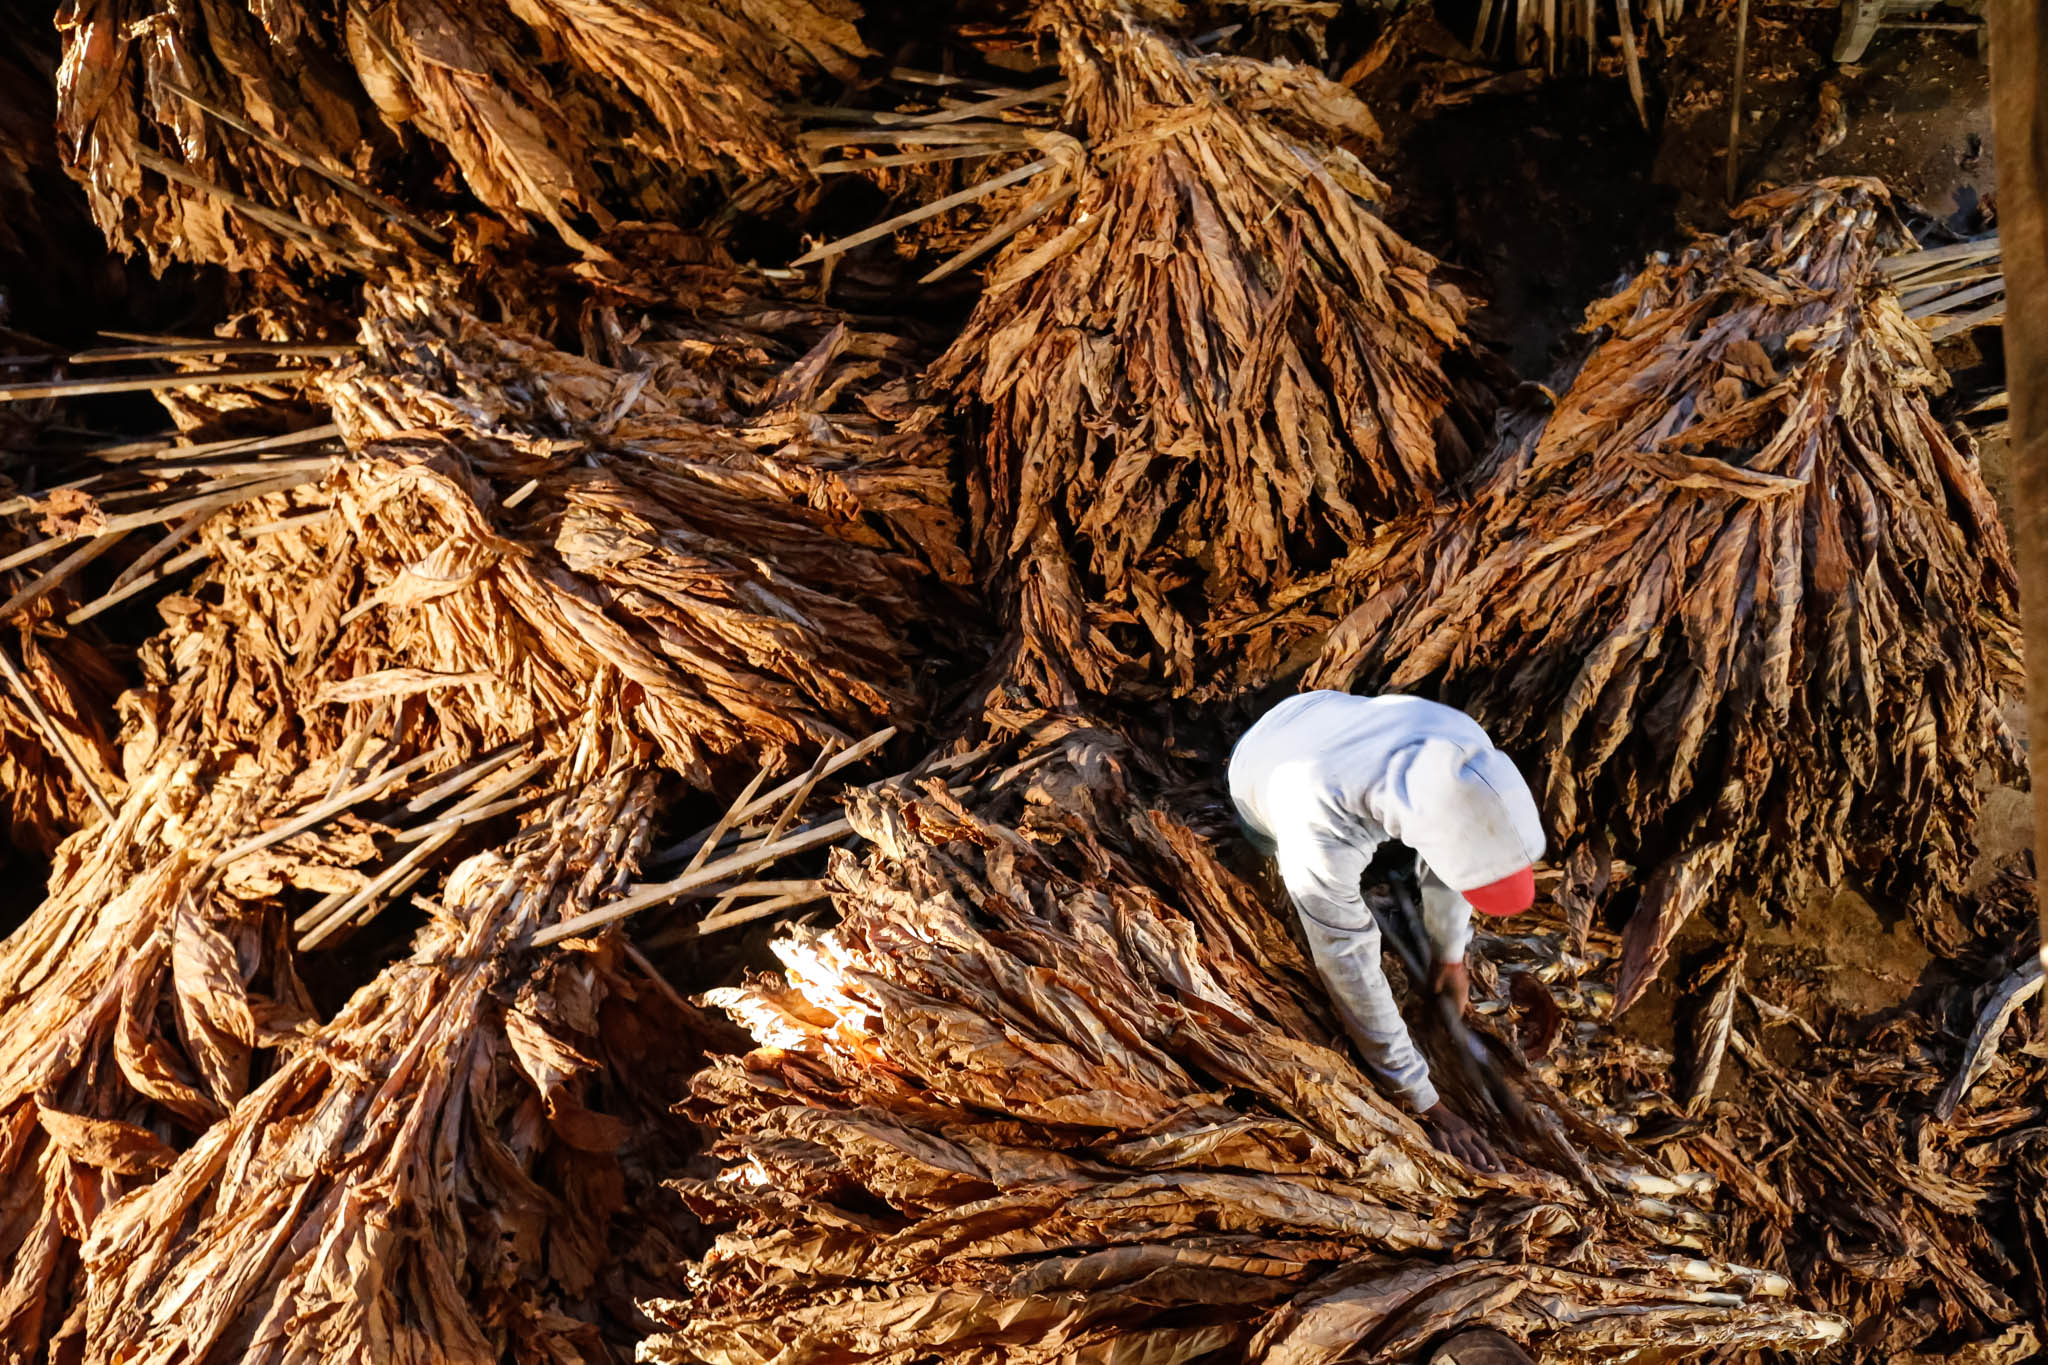  Tobacco stalks are separated for processing at the Mucci Farm in Midway, Kentucky.&nbsp; 